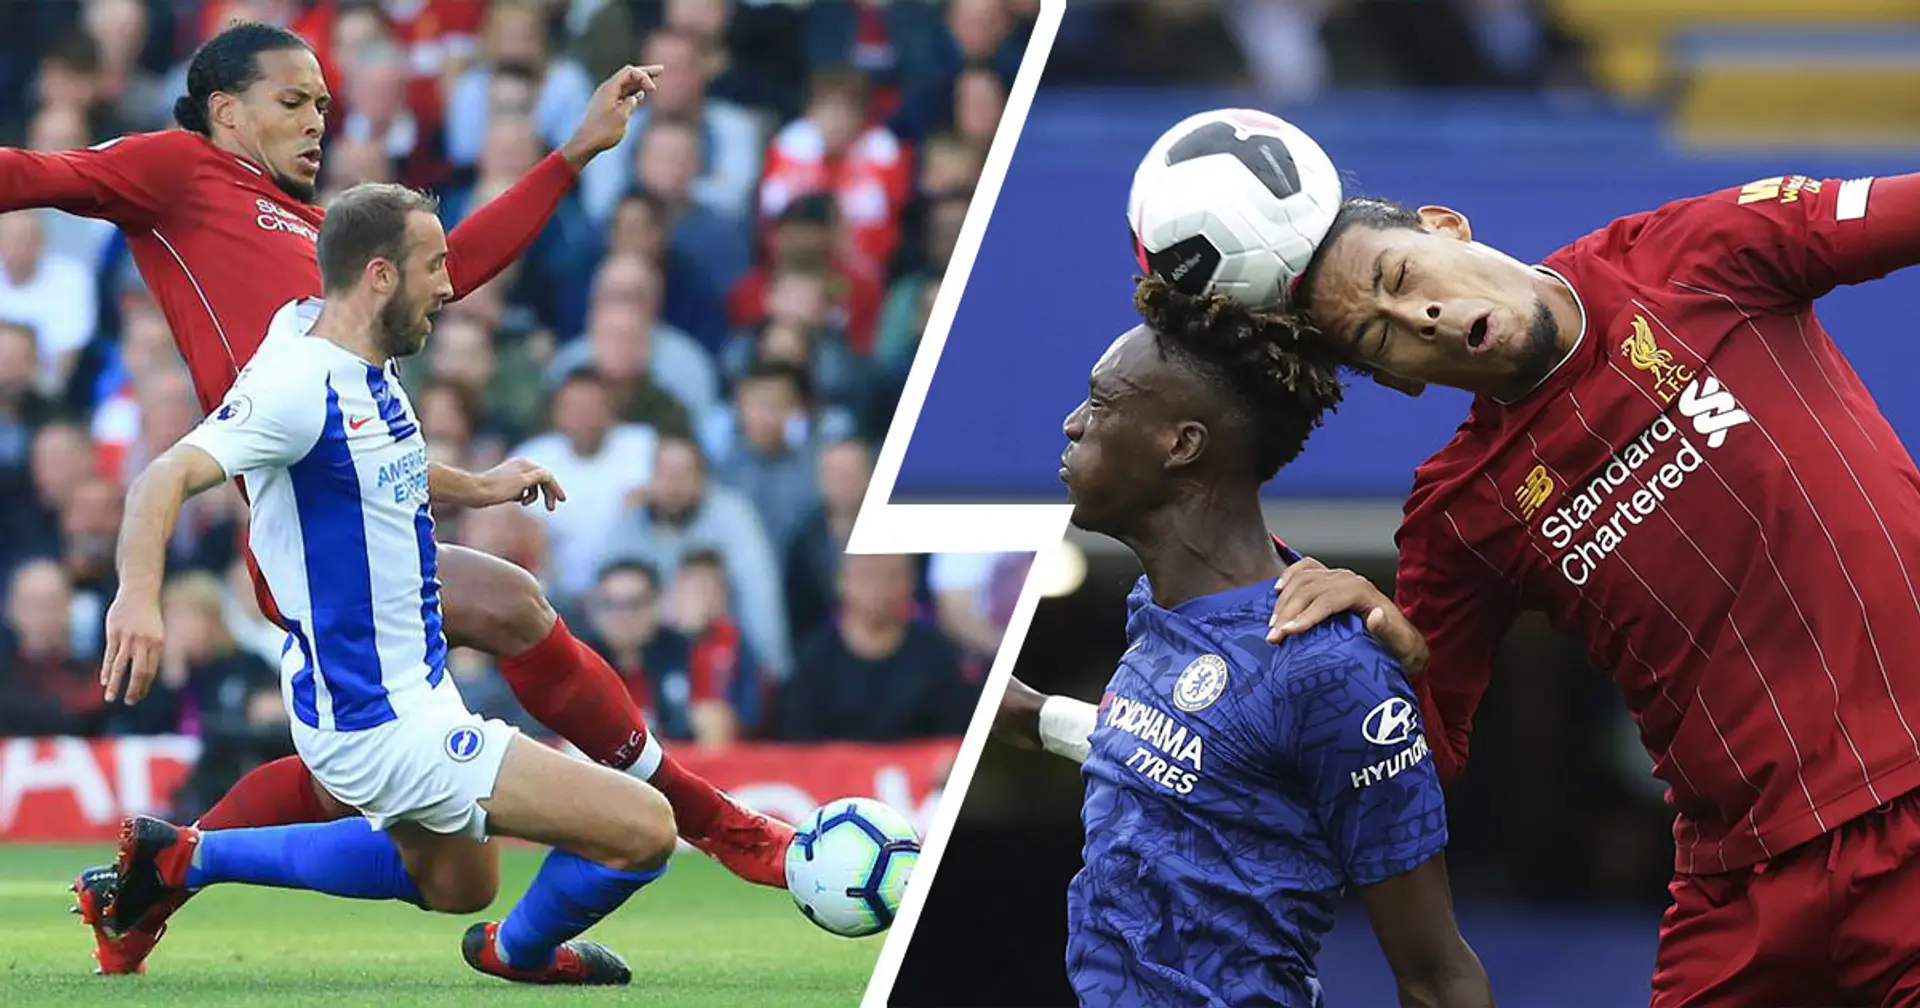 'He treated me like a 12-year-old boy!': 5 forwards, besides Messi, who just hate to play against Van Dijk